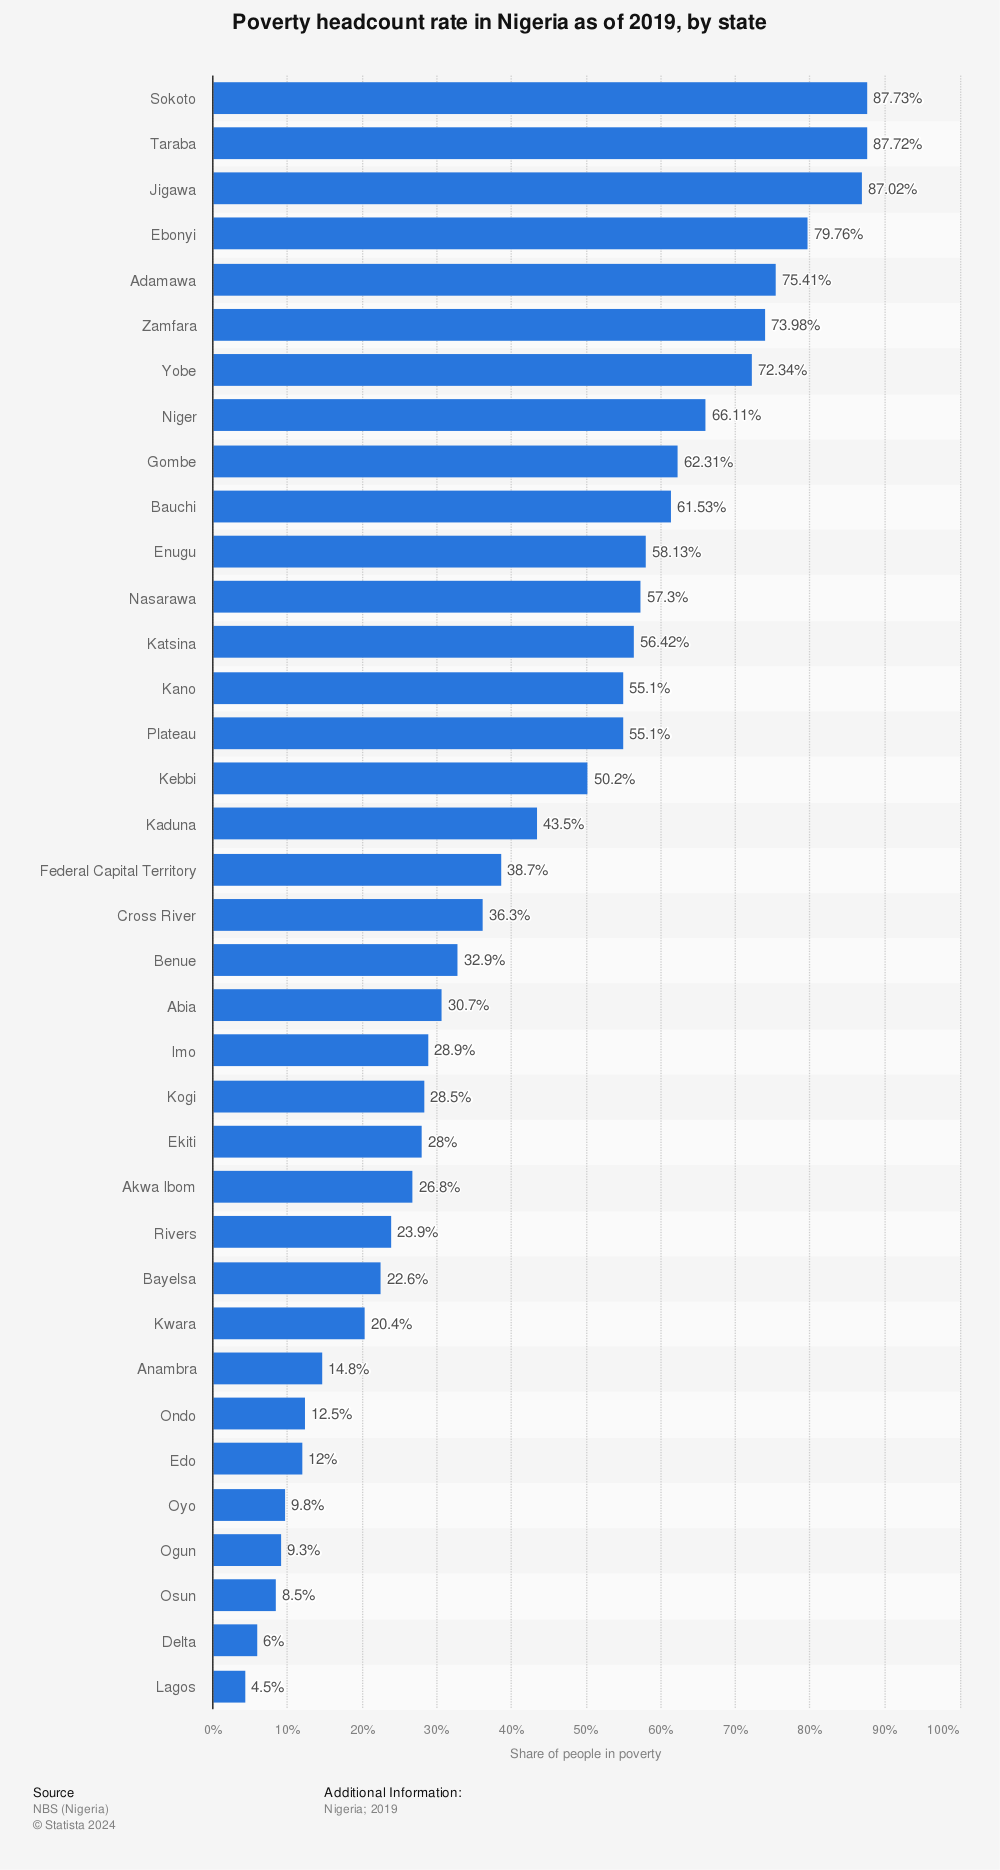 Statistic: Poverty headcount rate in Nigeria as of 2019, by state | Statista